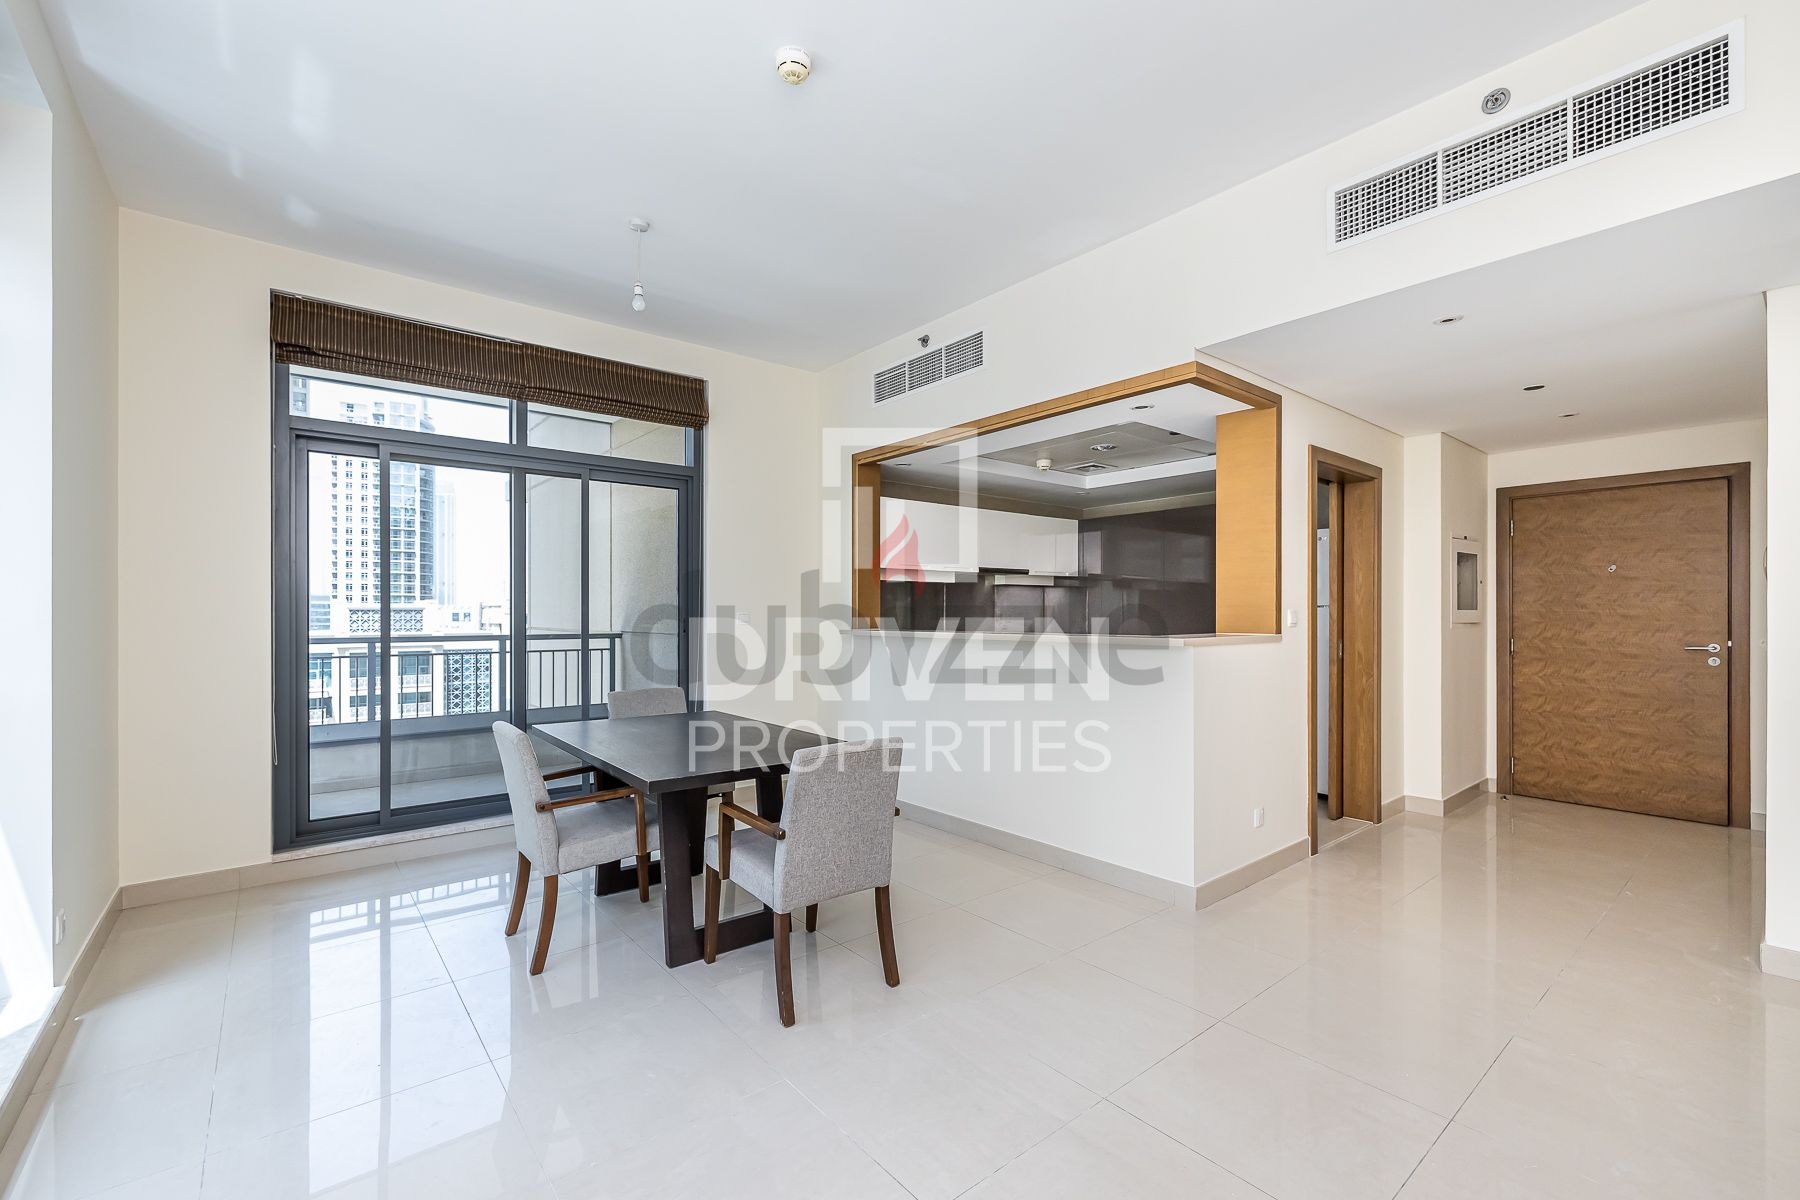 Spacious Bright Apt | Ready To Move In